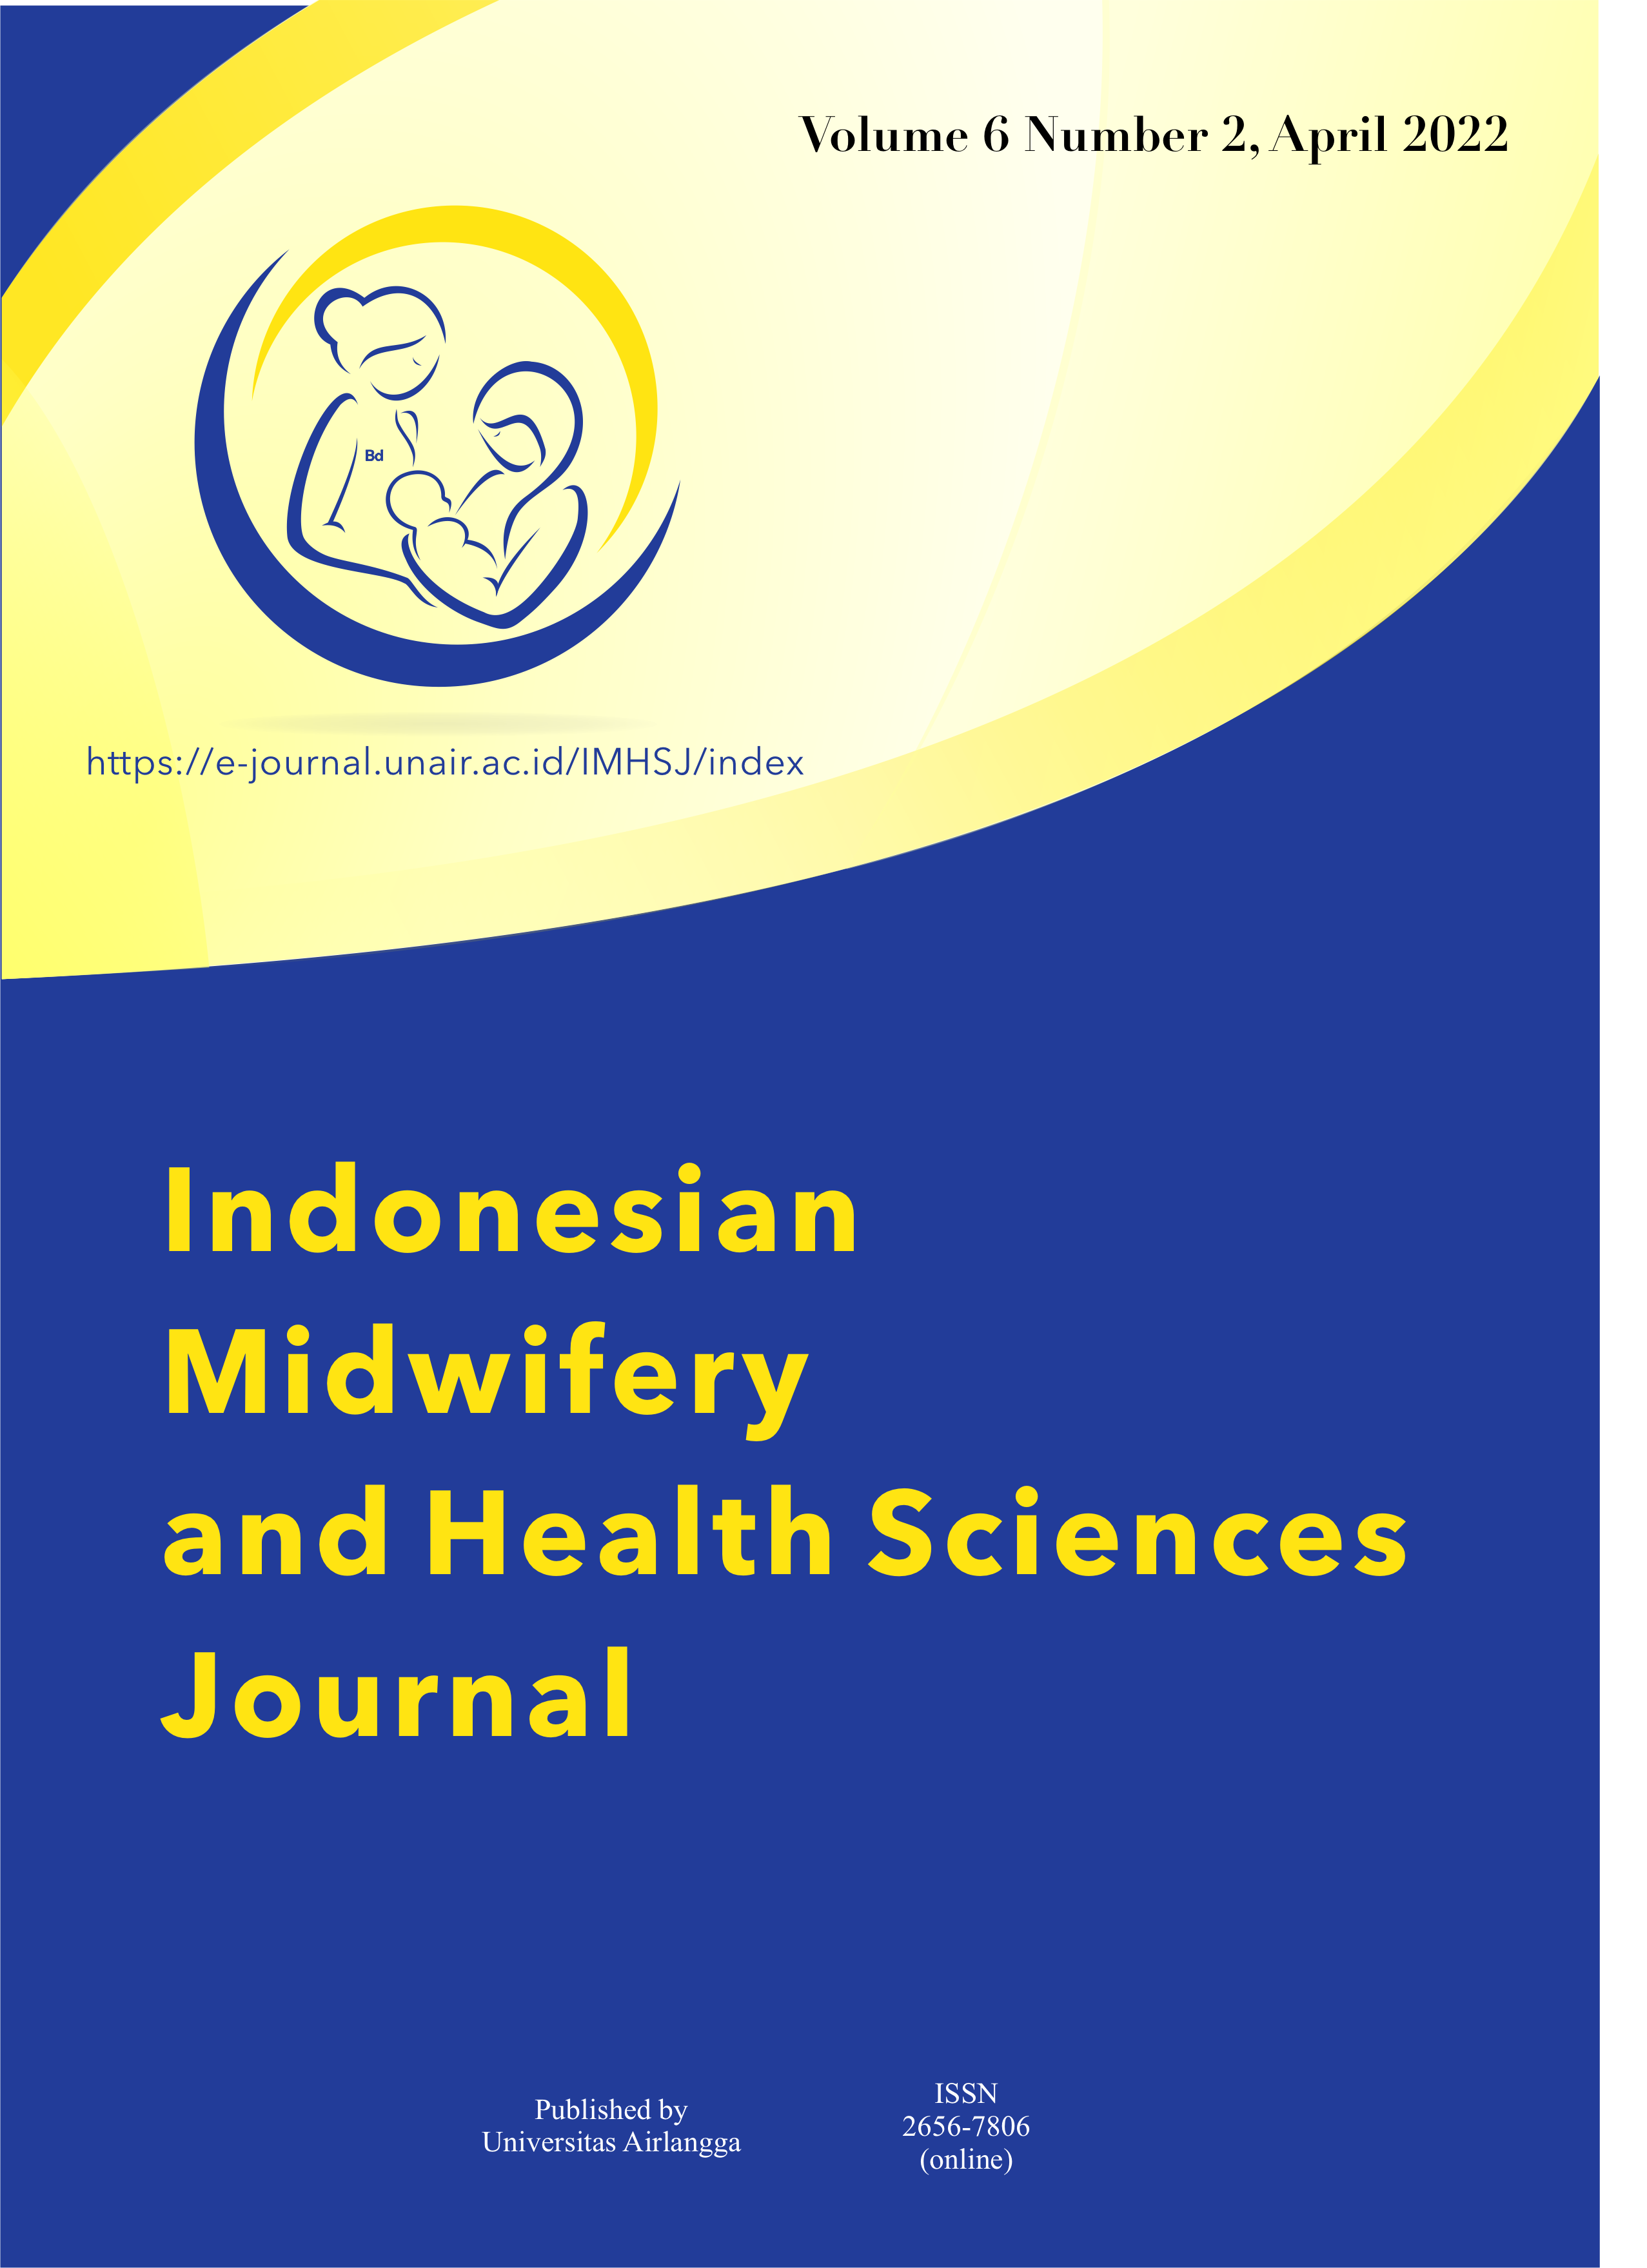 						View Vol. 6 No. 2 (2022): Indonesian Midwifery and Health Sciences Journal, April 2022
					